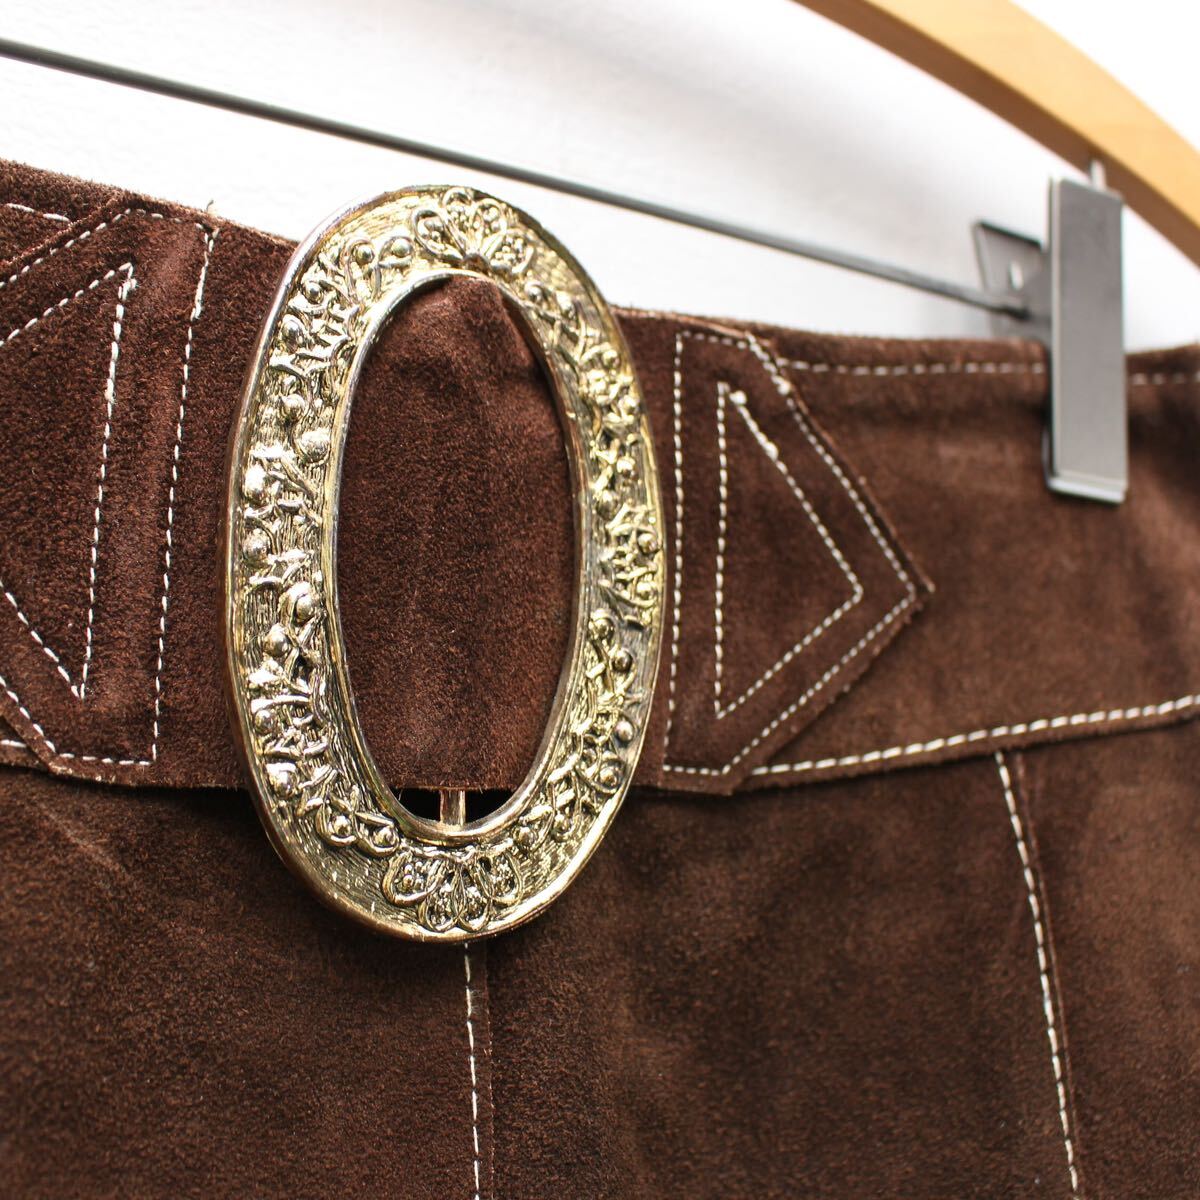 *SPECIAL ITEM* 60's USA VINTAGE BACKLE DESIGN LEATHER MINI SKIRT/60年代アメリカ古着バックルデザインレザーミニスカート_画像7